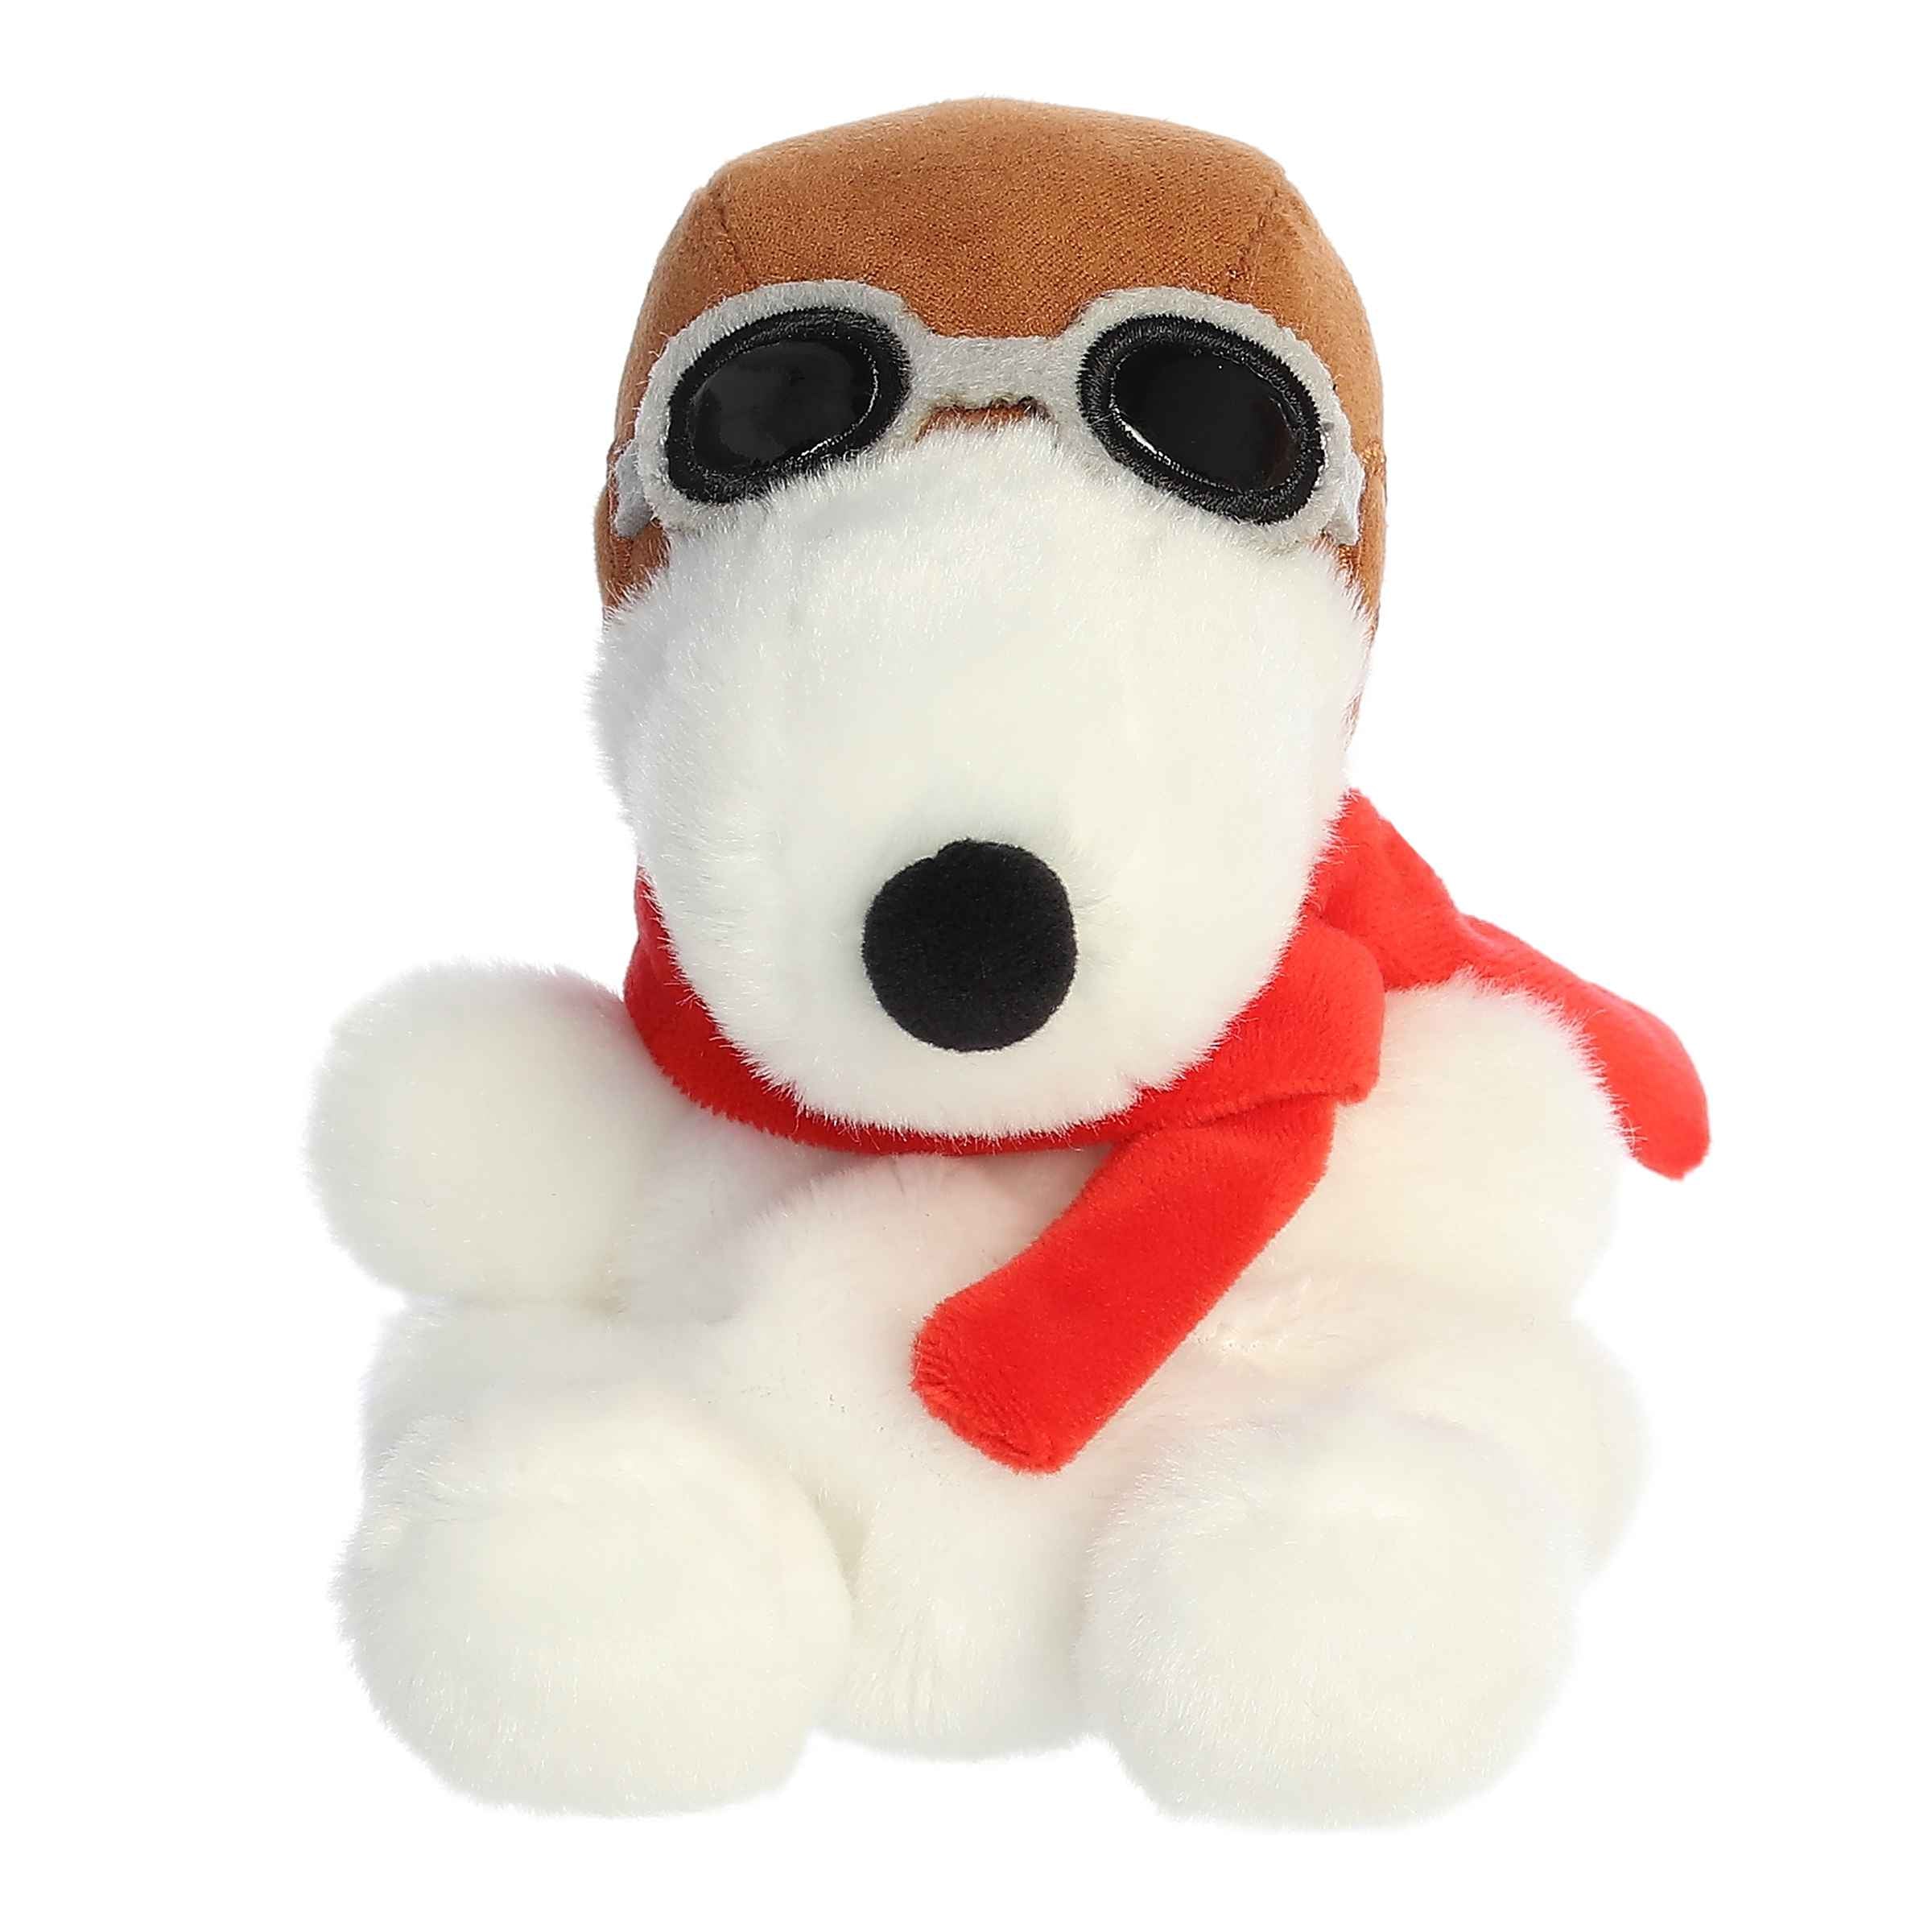 Flying Ace Snoopy Palm Pals plush from the Peanuts collection with cap, goggles, and red scarf, ready for adventure